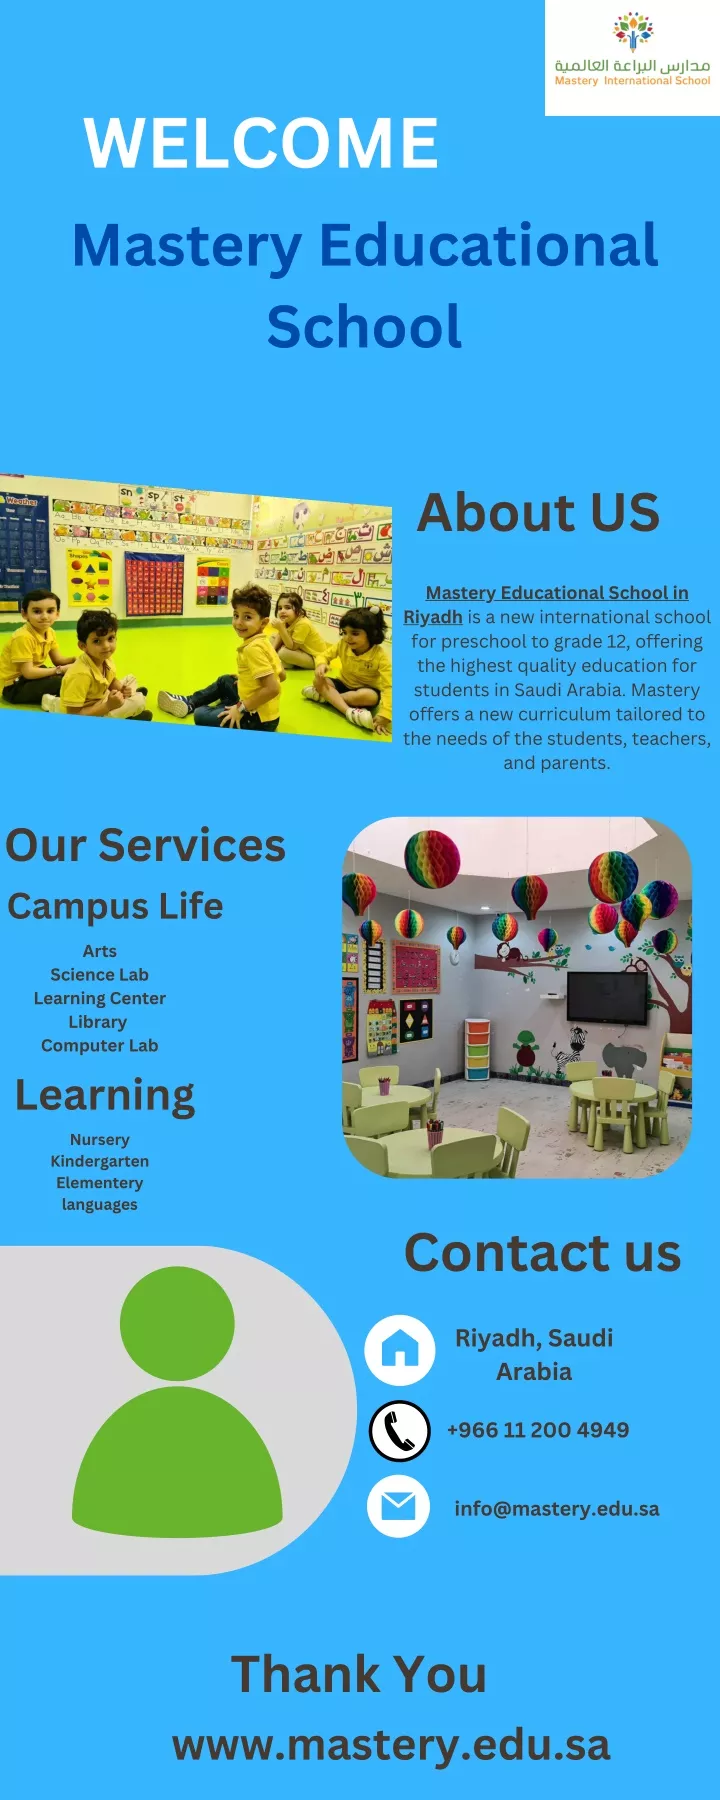 welcome mastery educational school